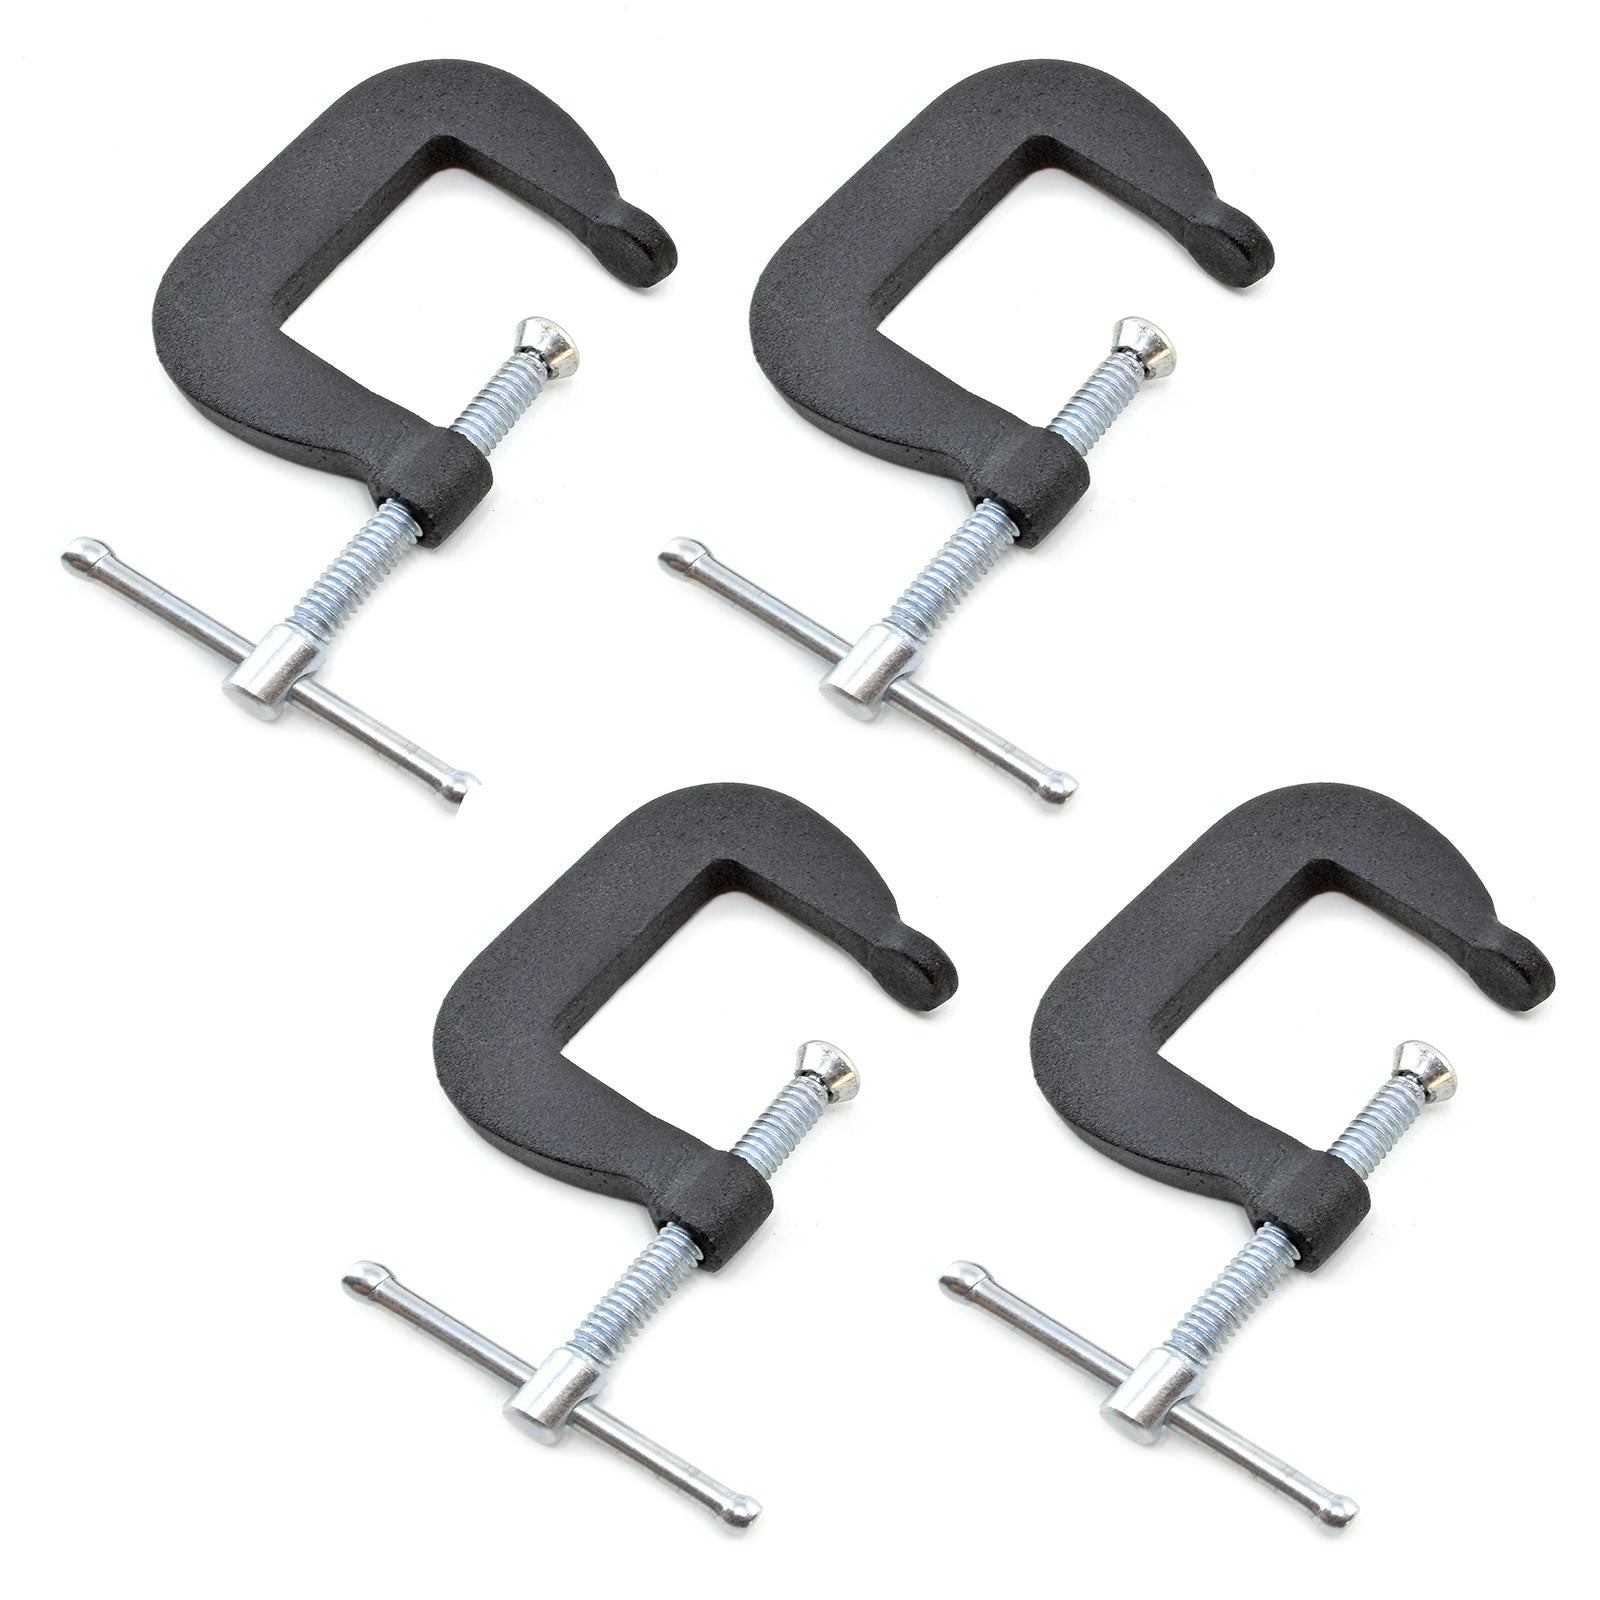 1.25" x 1.25" Miniature Forged Steel C - clamp, Set of 4 - Micro - Mark Tool Clamps & Vises